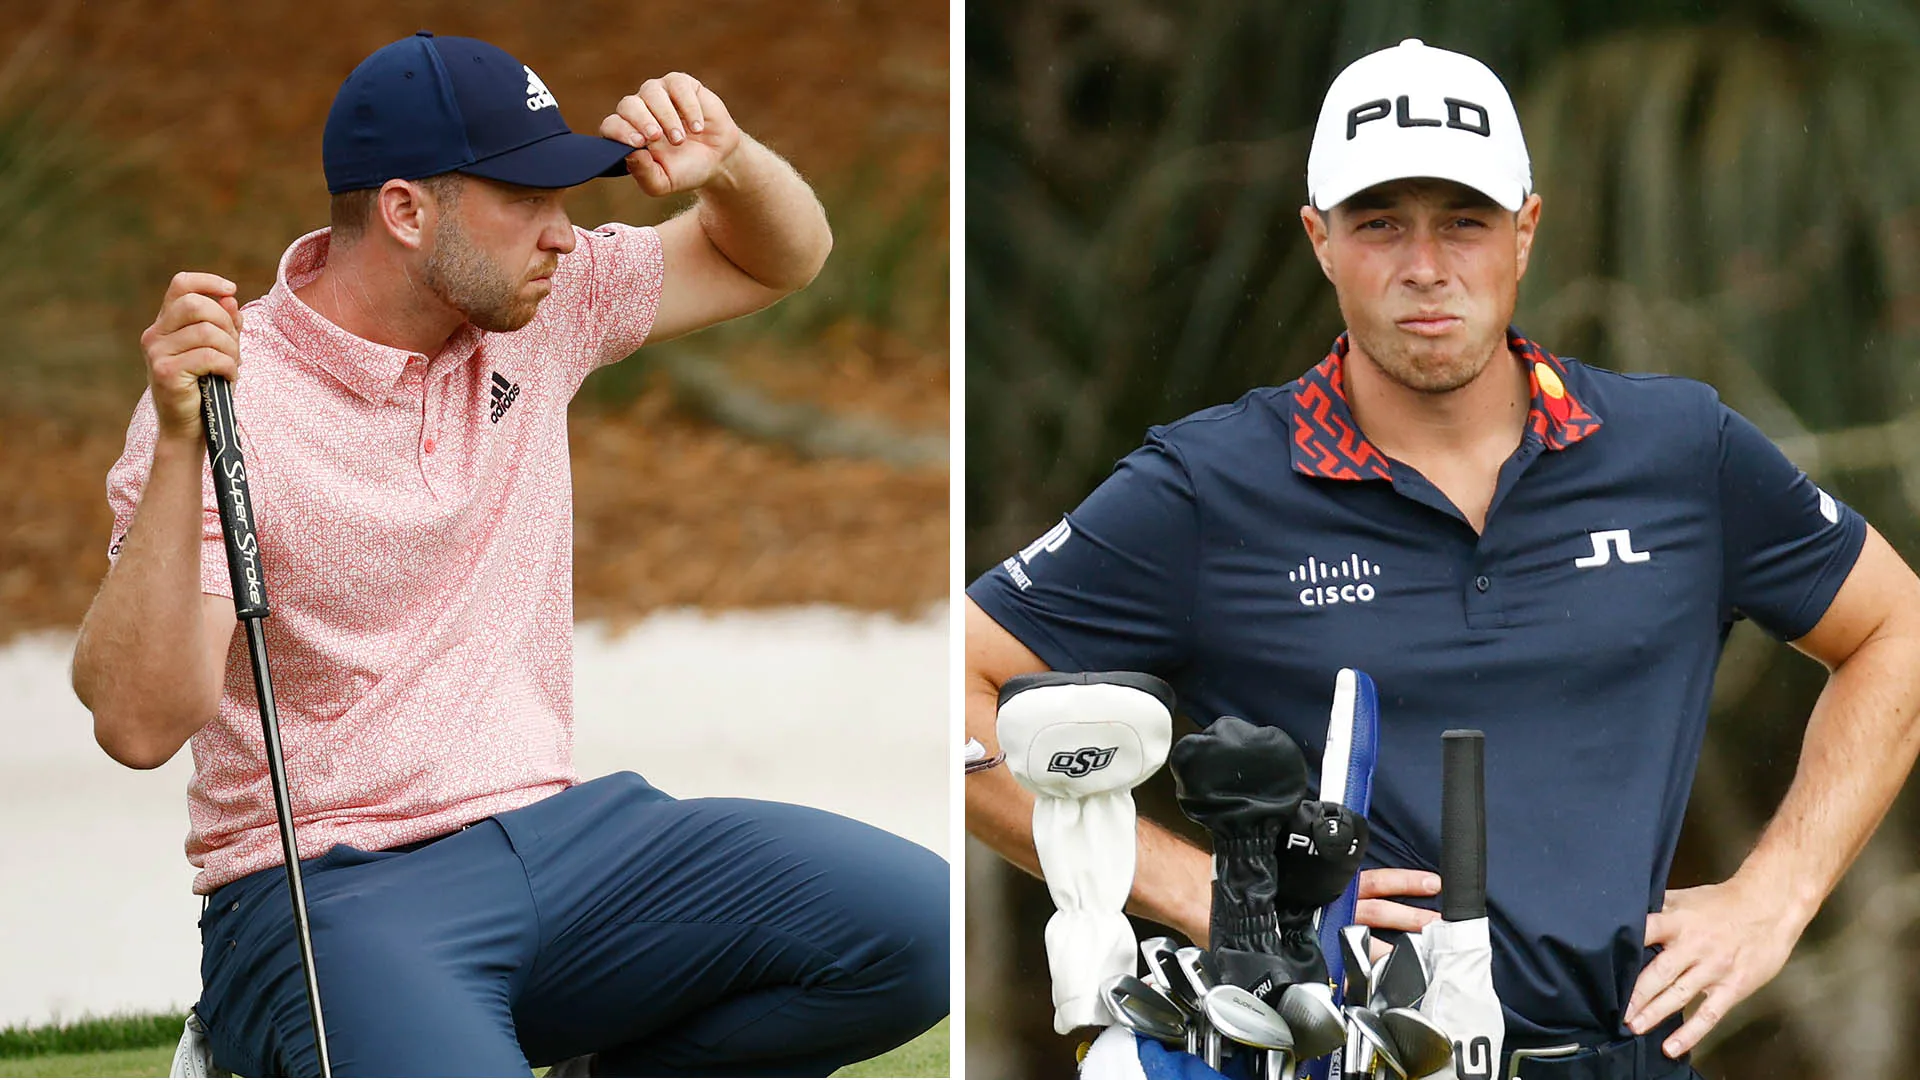 The Players: ‘We’ve got to protect the field’: Daniel Berger’s drop scrutinized by playing competitors